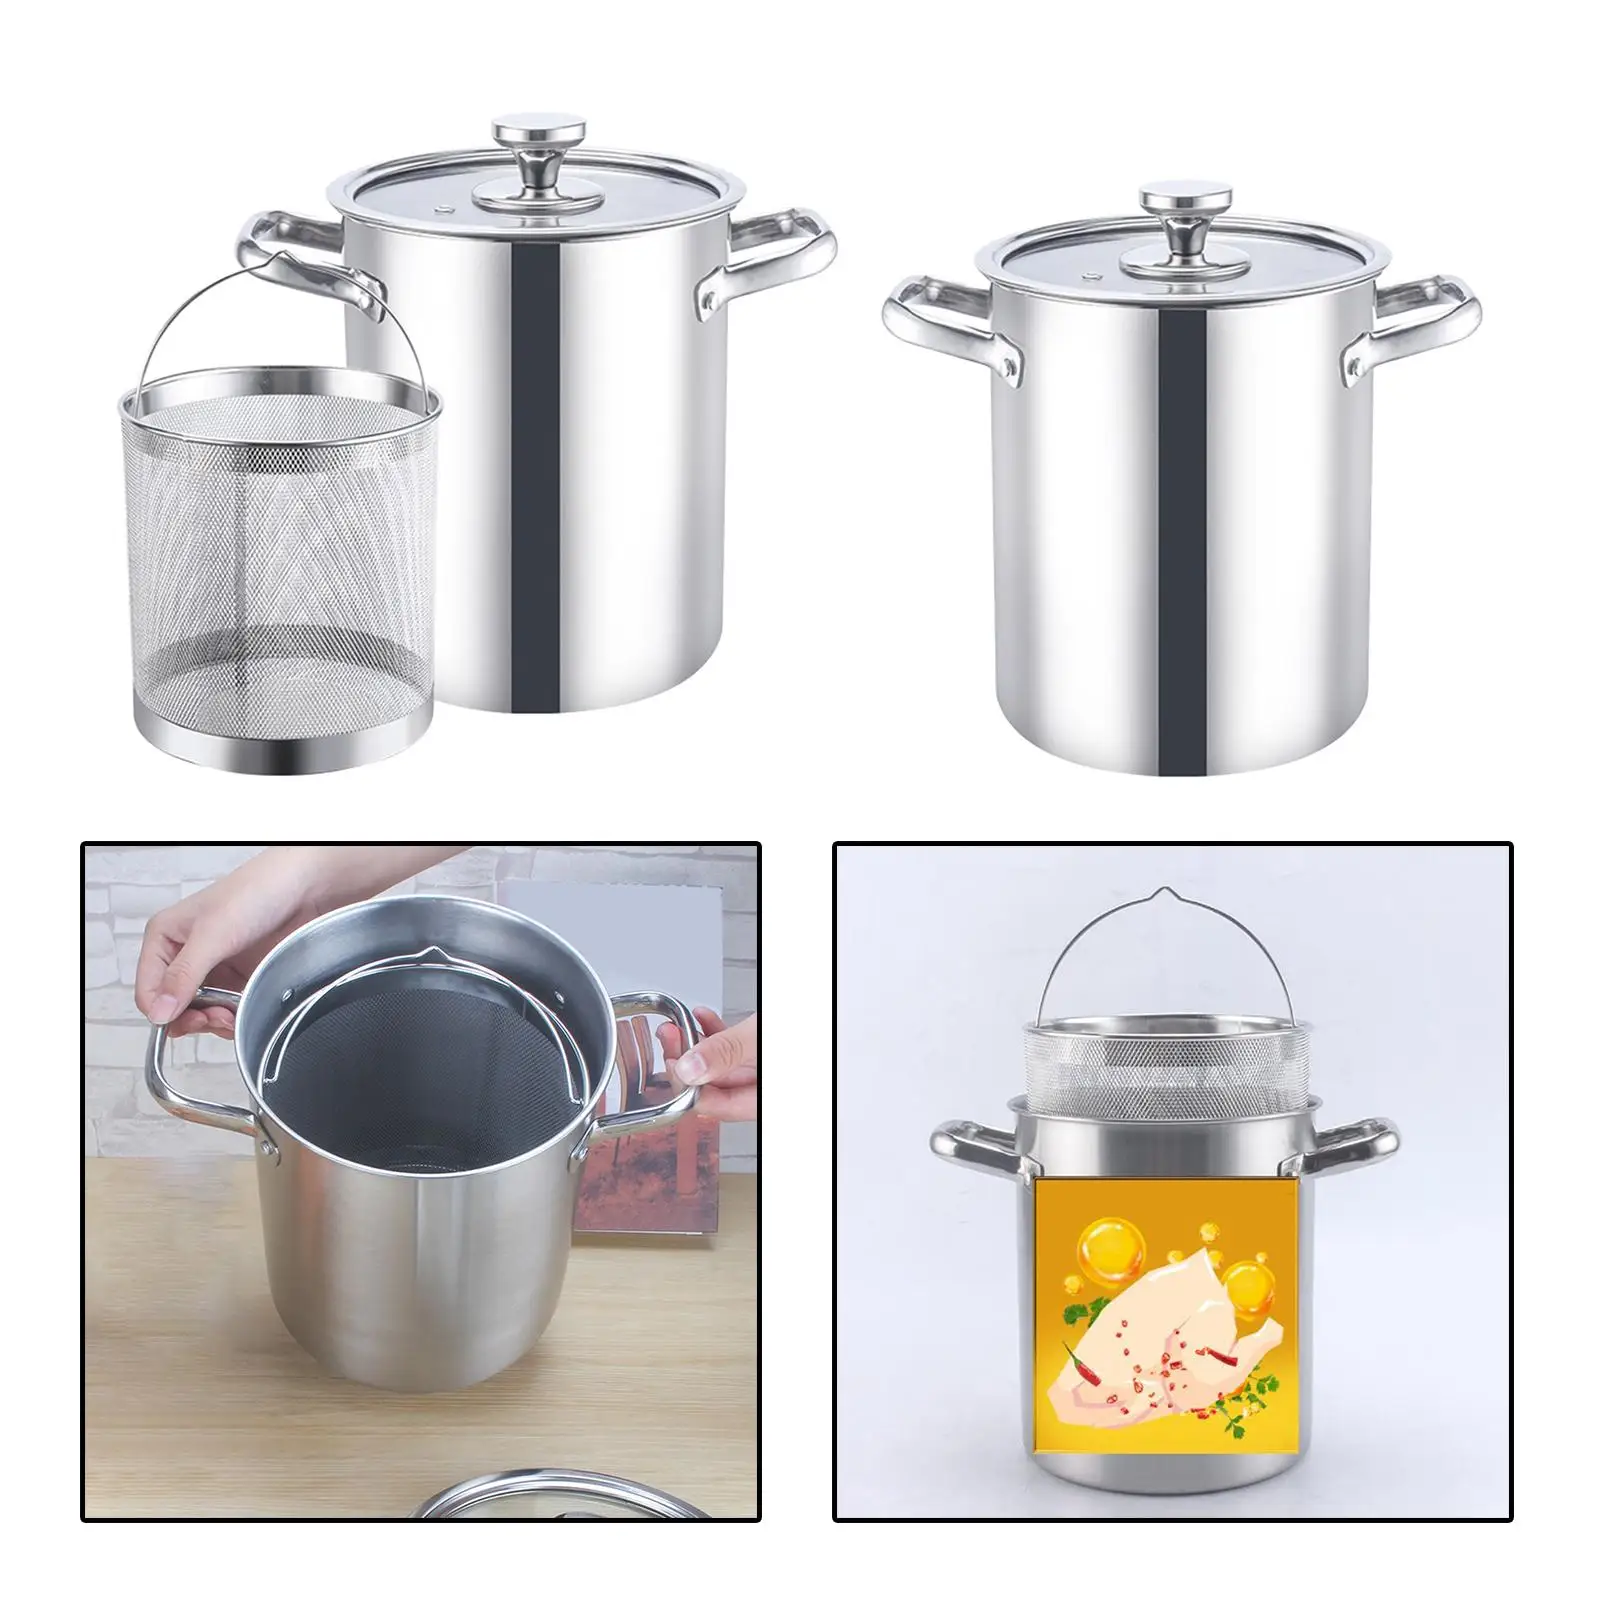 304 Stainless Steel Stockpot, Large Deep Frying Stock Pots, with Double Handle & Glass Lid, Heavy Duty Kitchen Soup Pot